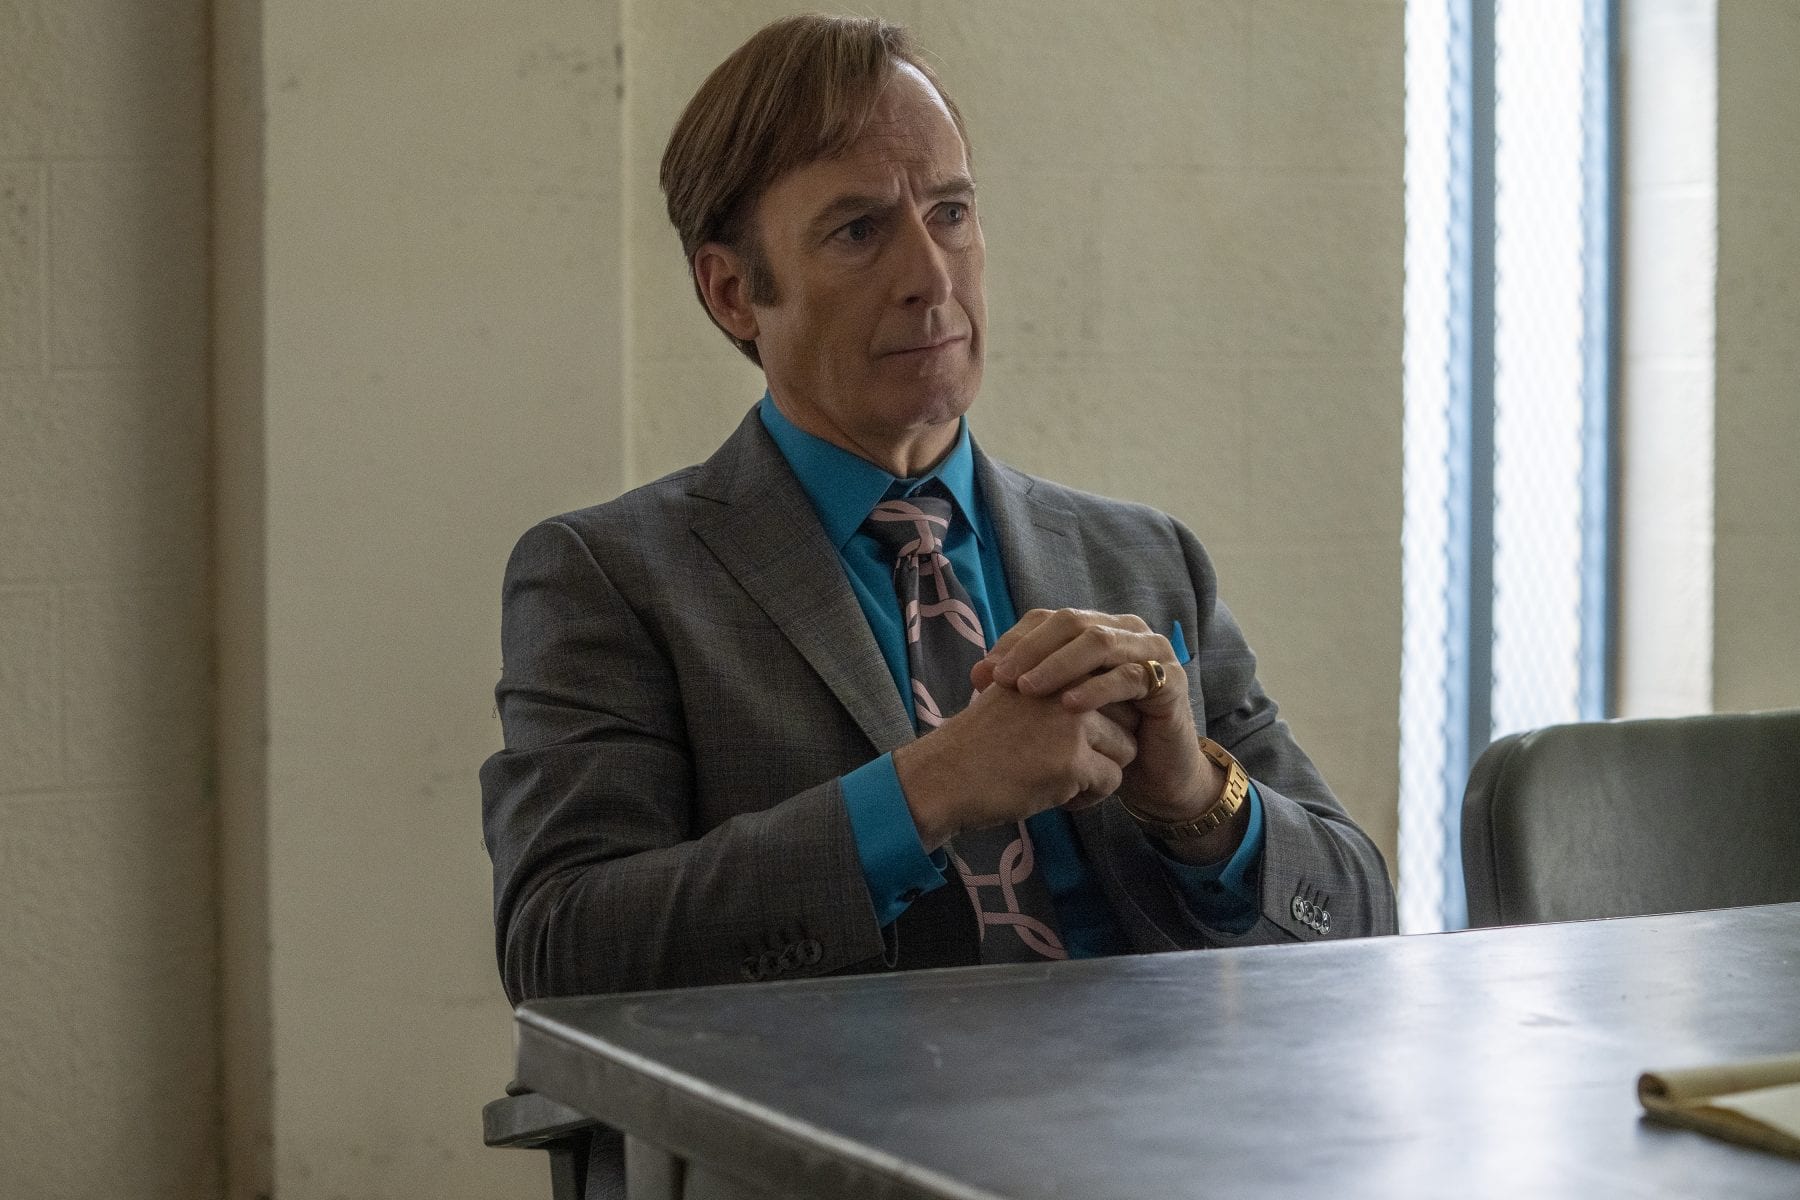 Jimmy sits at the table in the interrogation room practicing law as Saul Goodman 